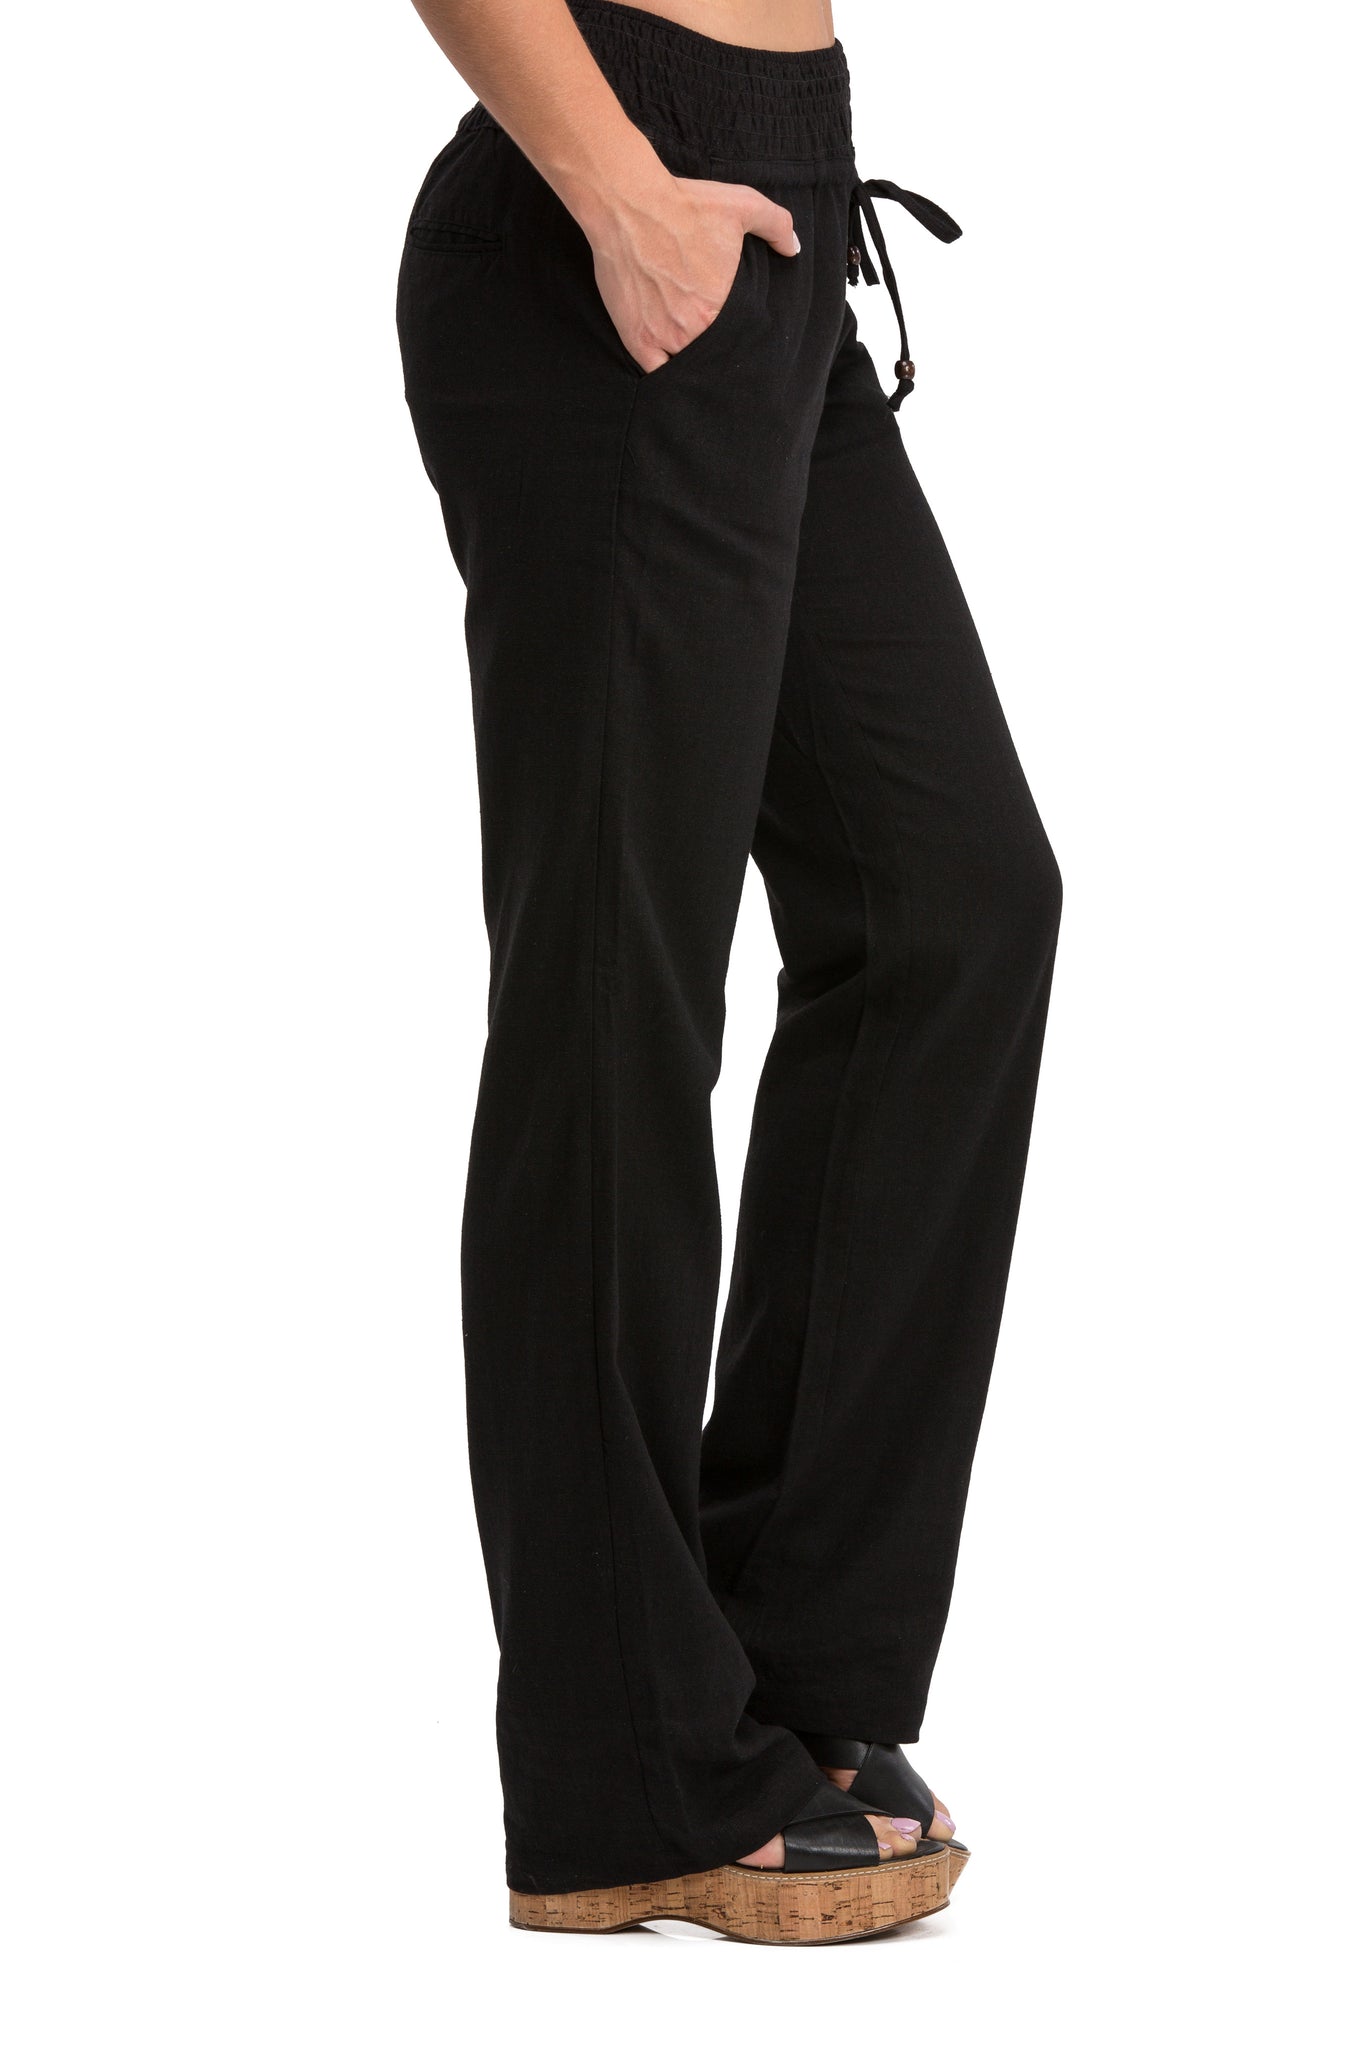 Comfy Drawstring Linen Pants Long with Smocked Band Waist (Black) - Poplooks